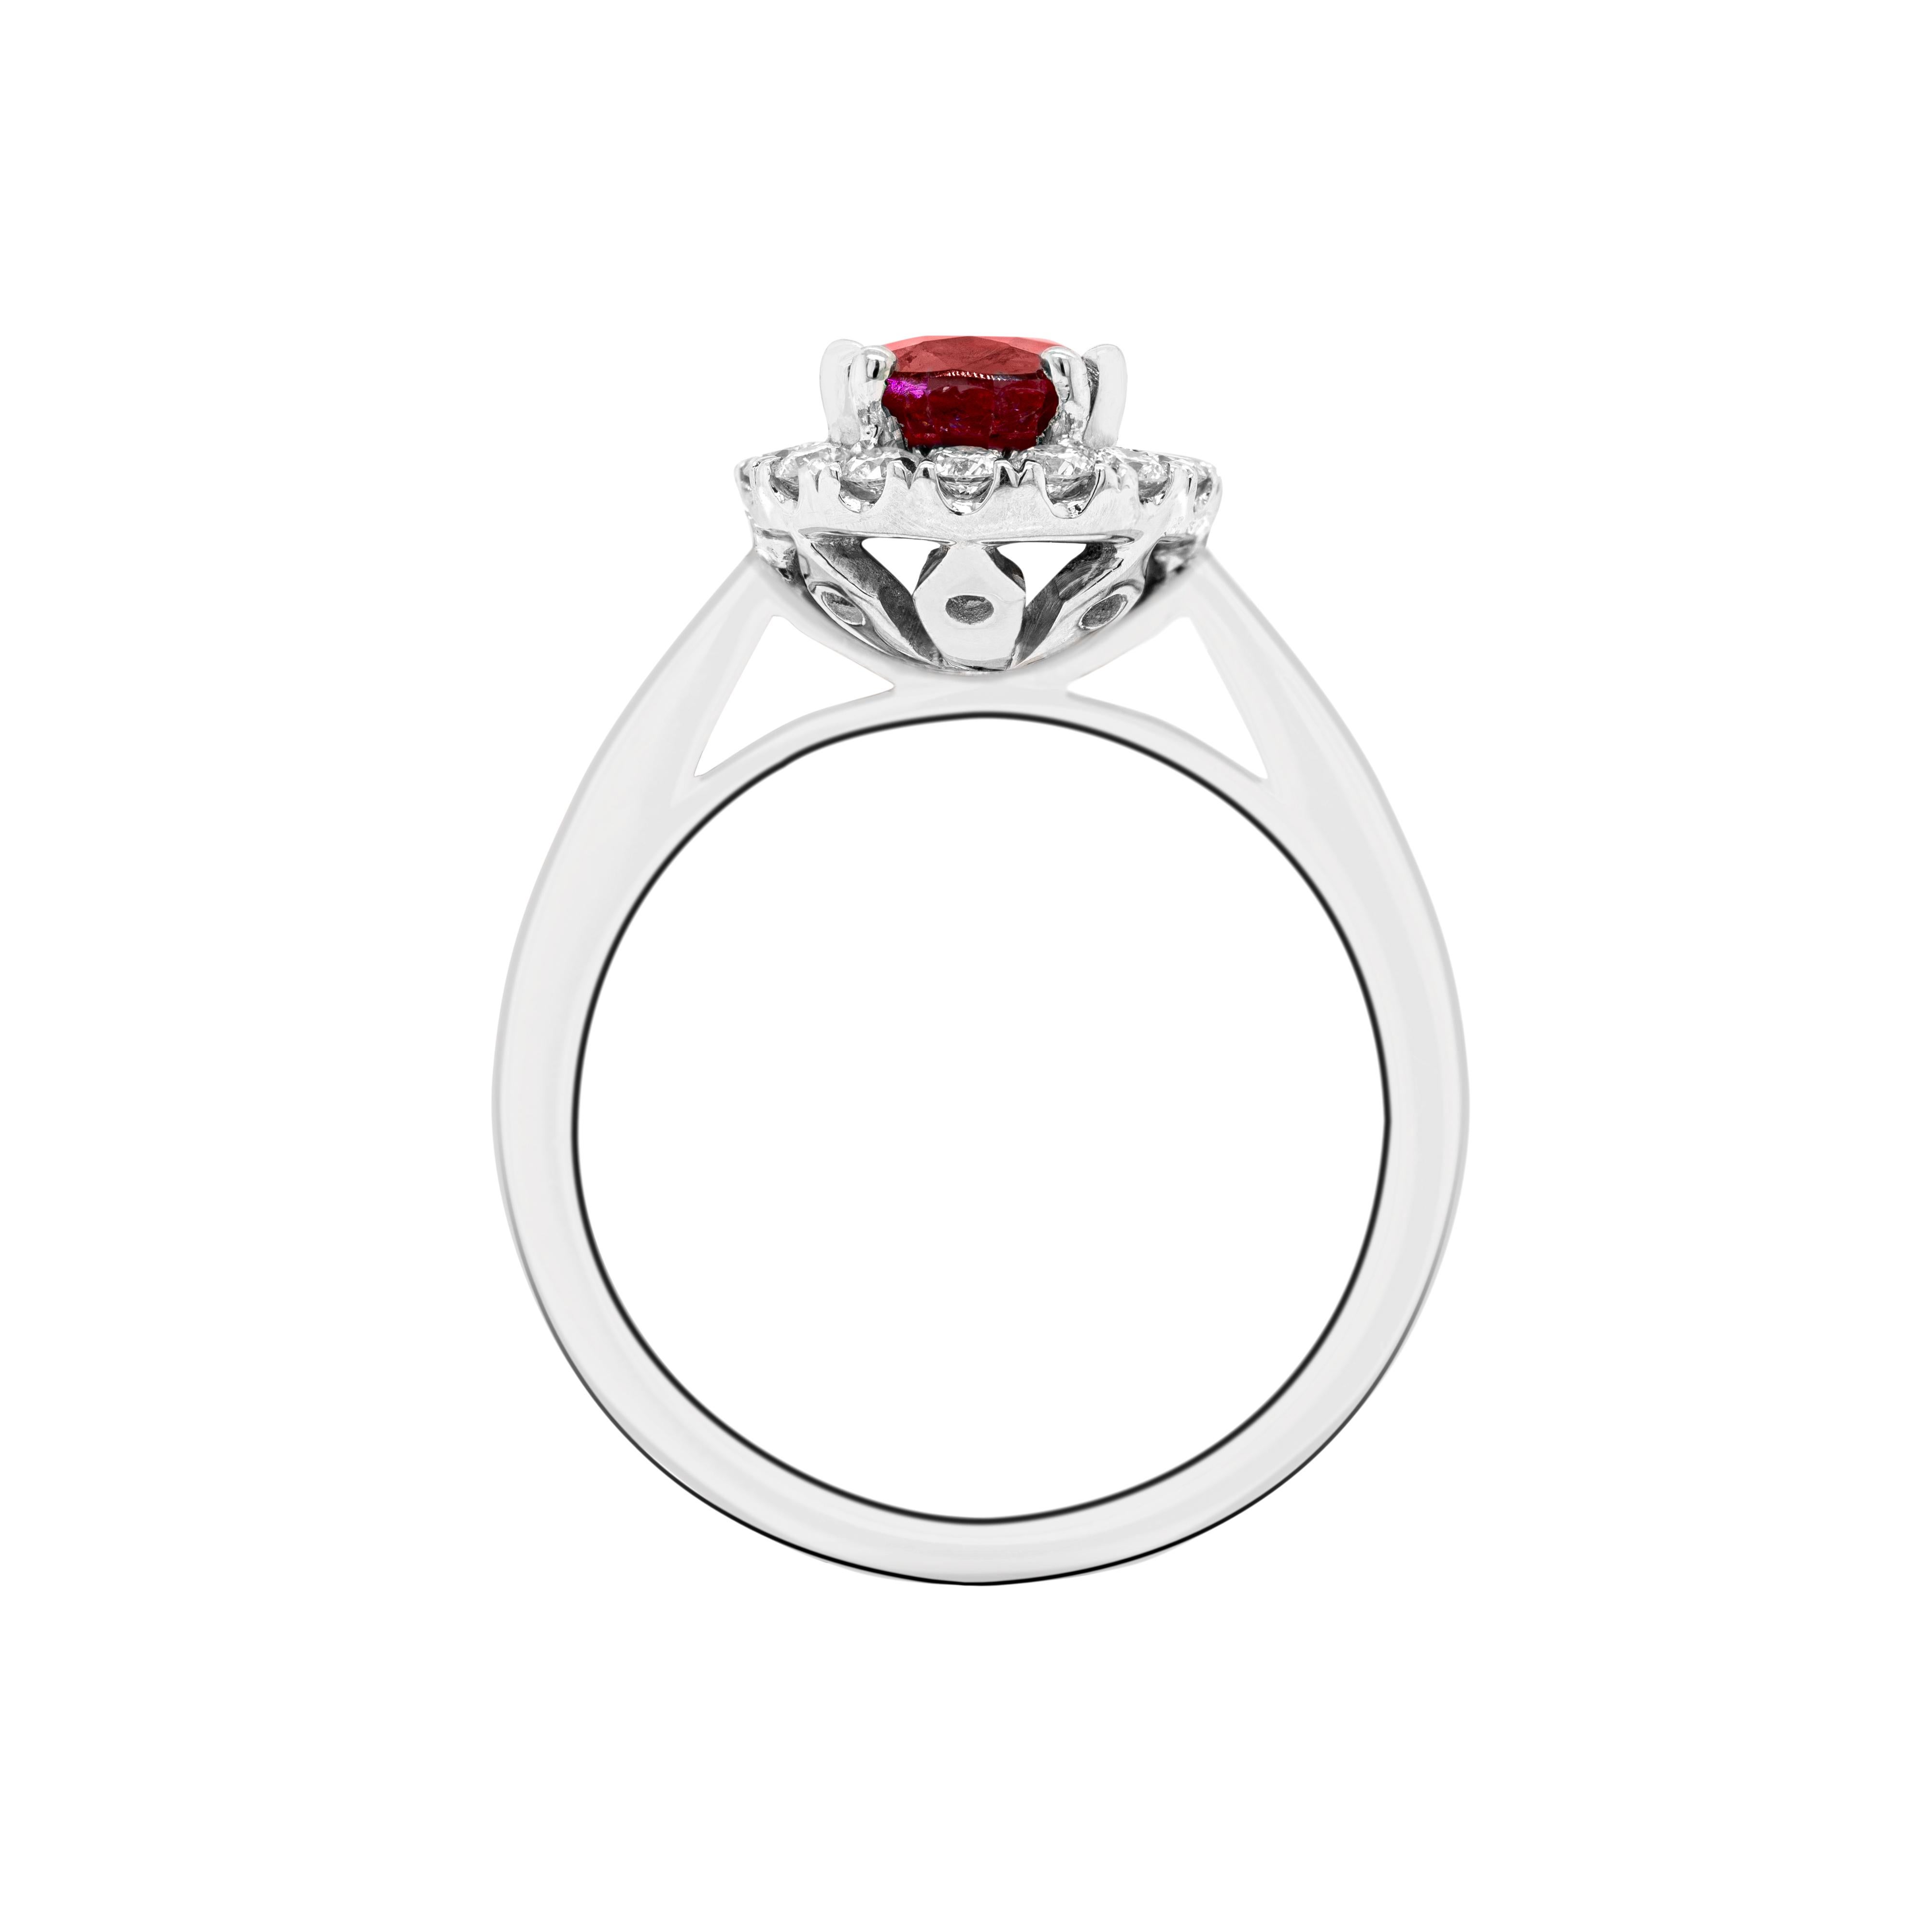 This beautiful engagement ring features a 1.99ct lively red oval shaped ruby mounted in an open back, four double claw setting. The gorgeous ruby is surrounded by a halo of 16 claw set fine round brilliant cut diamonds with a total weight of 0.28ct,